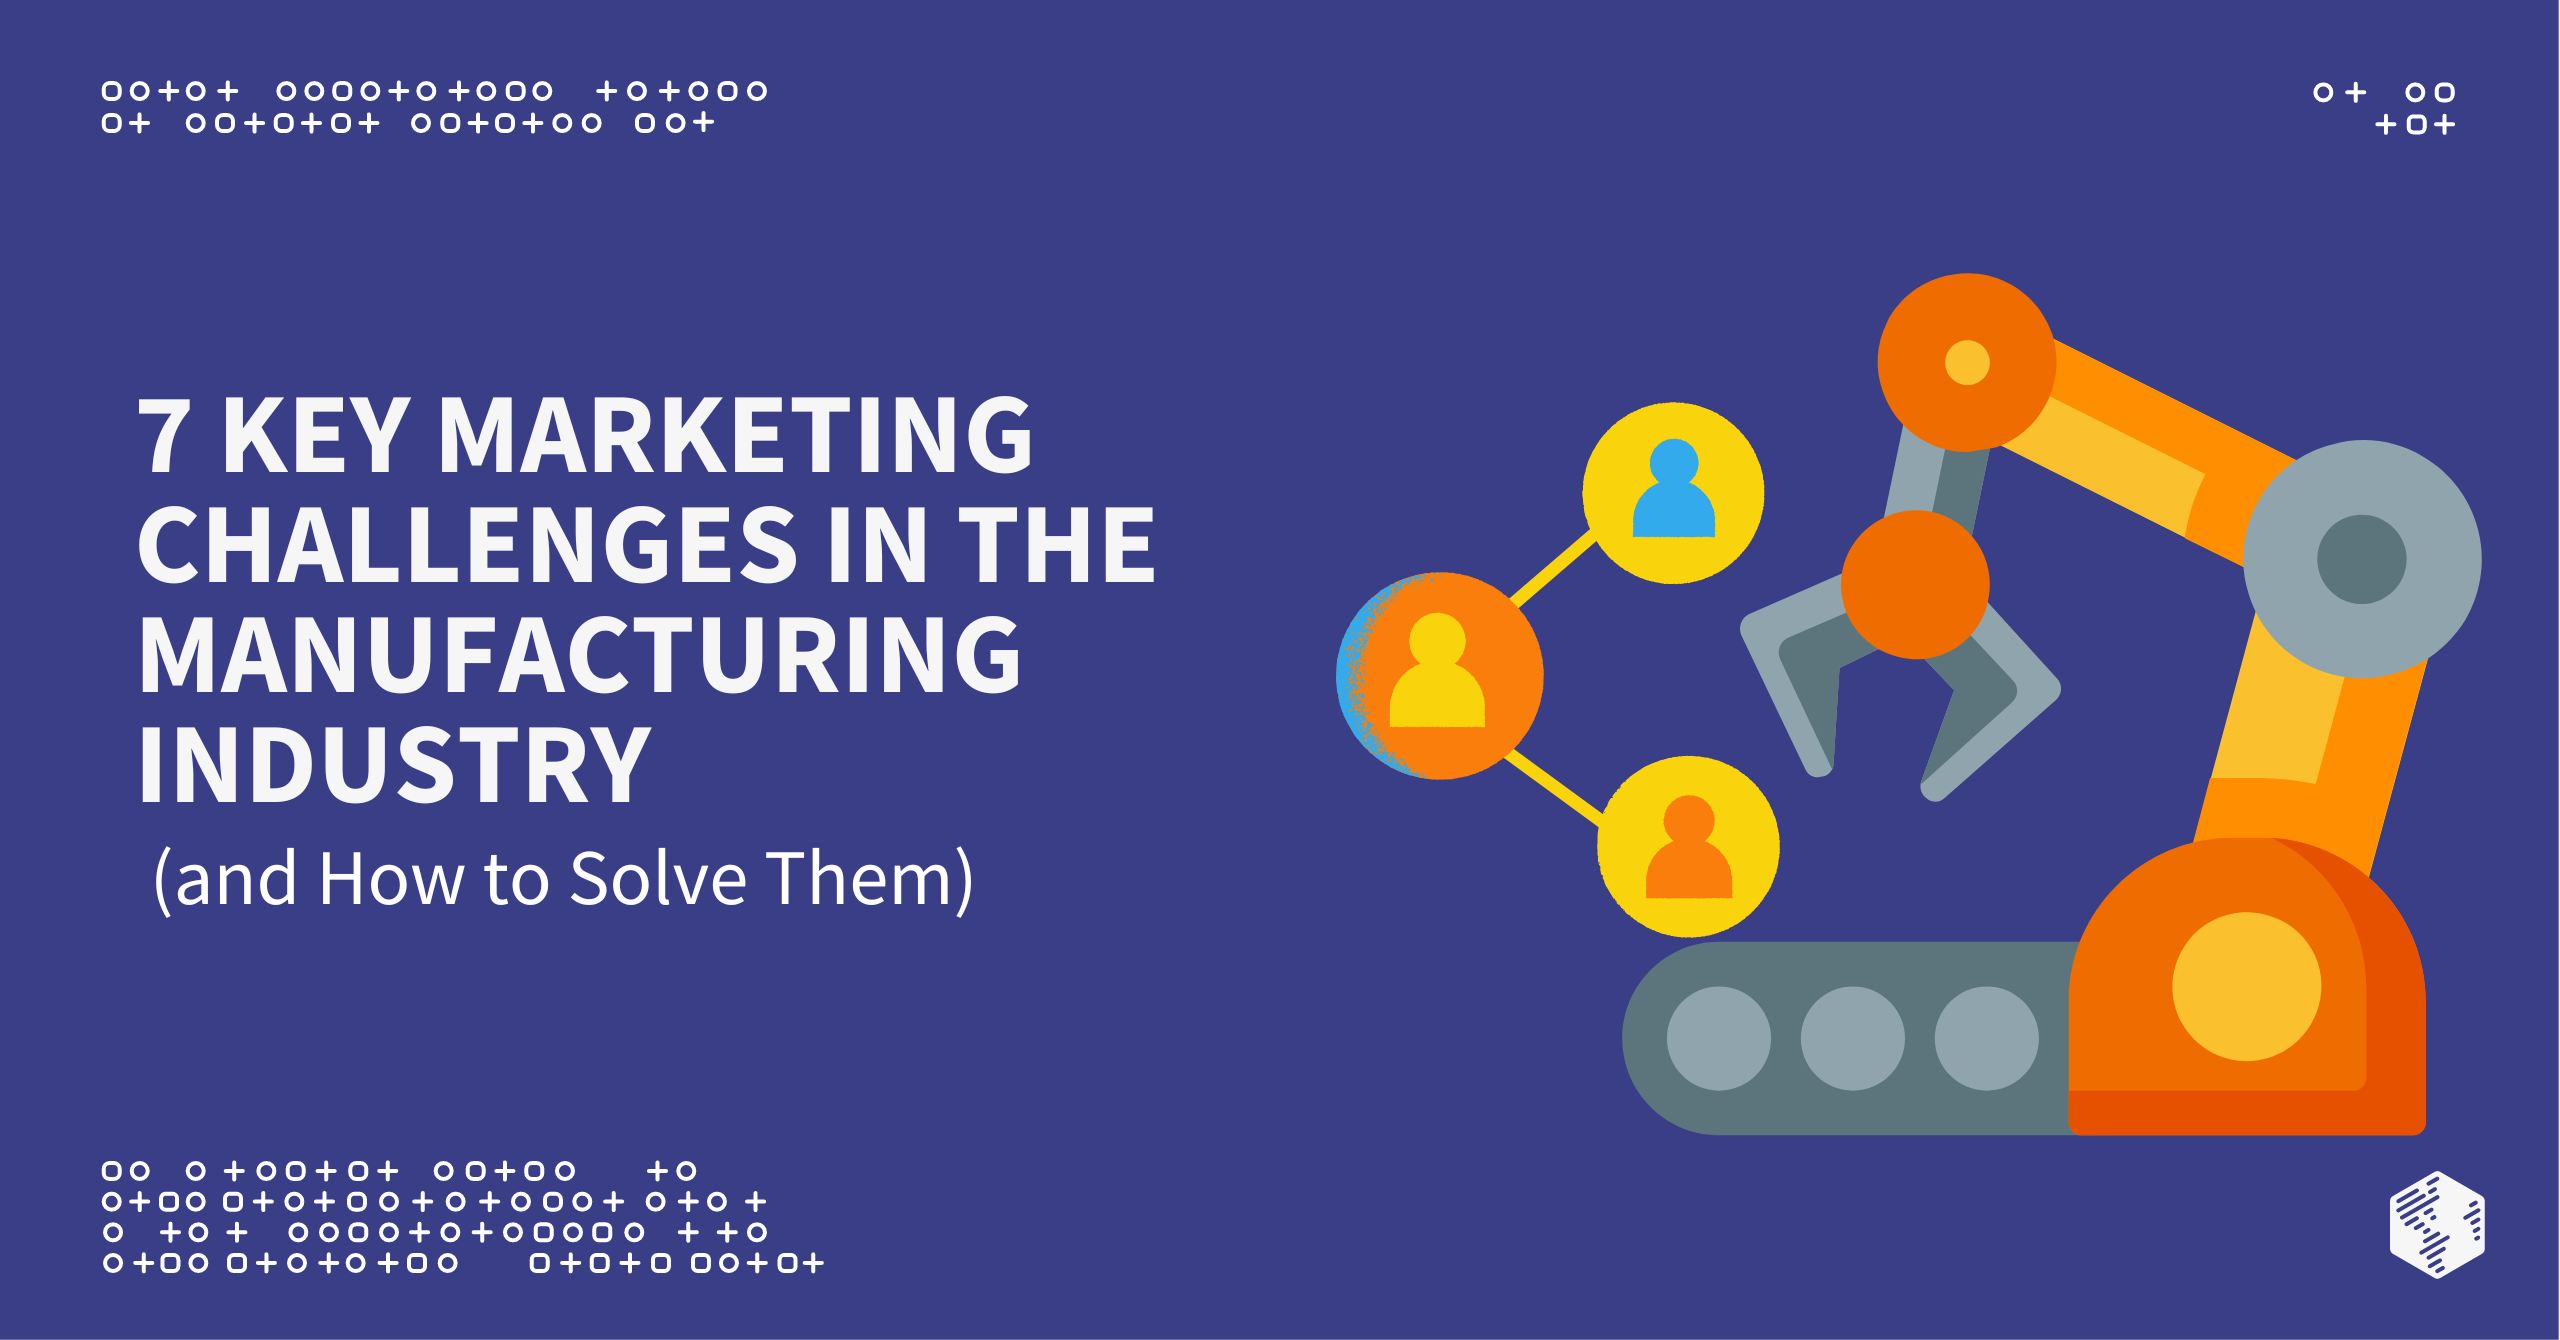 7 Key Marketing Challenges in the Manufacturing Industry (and How to Solve Them)